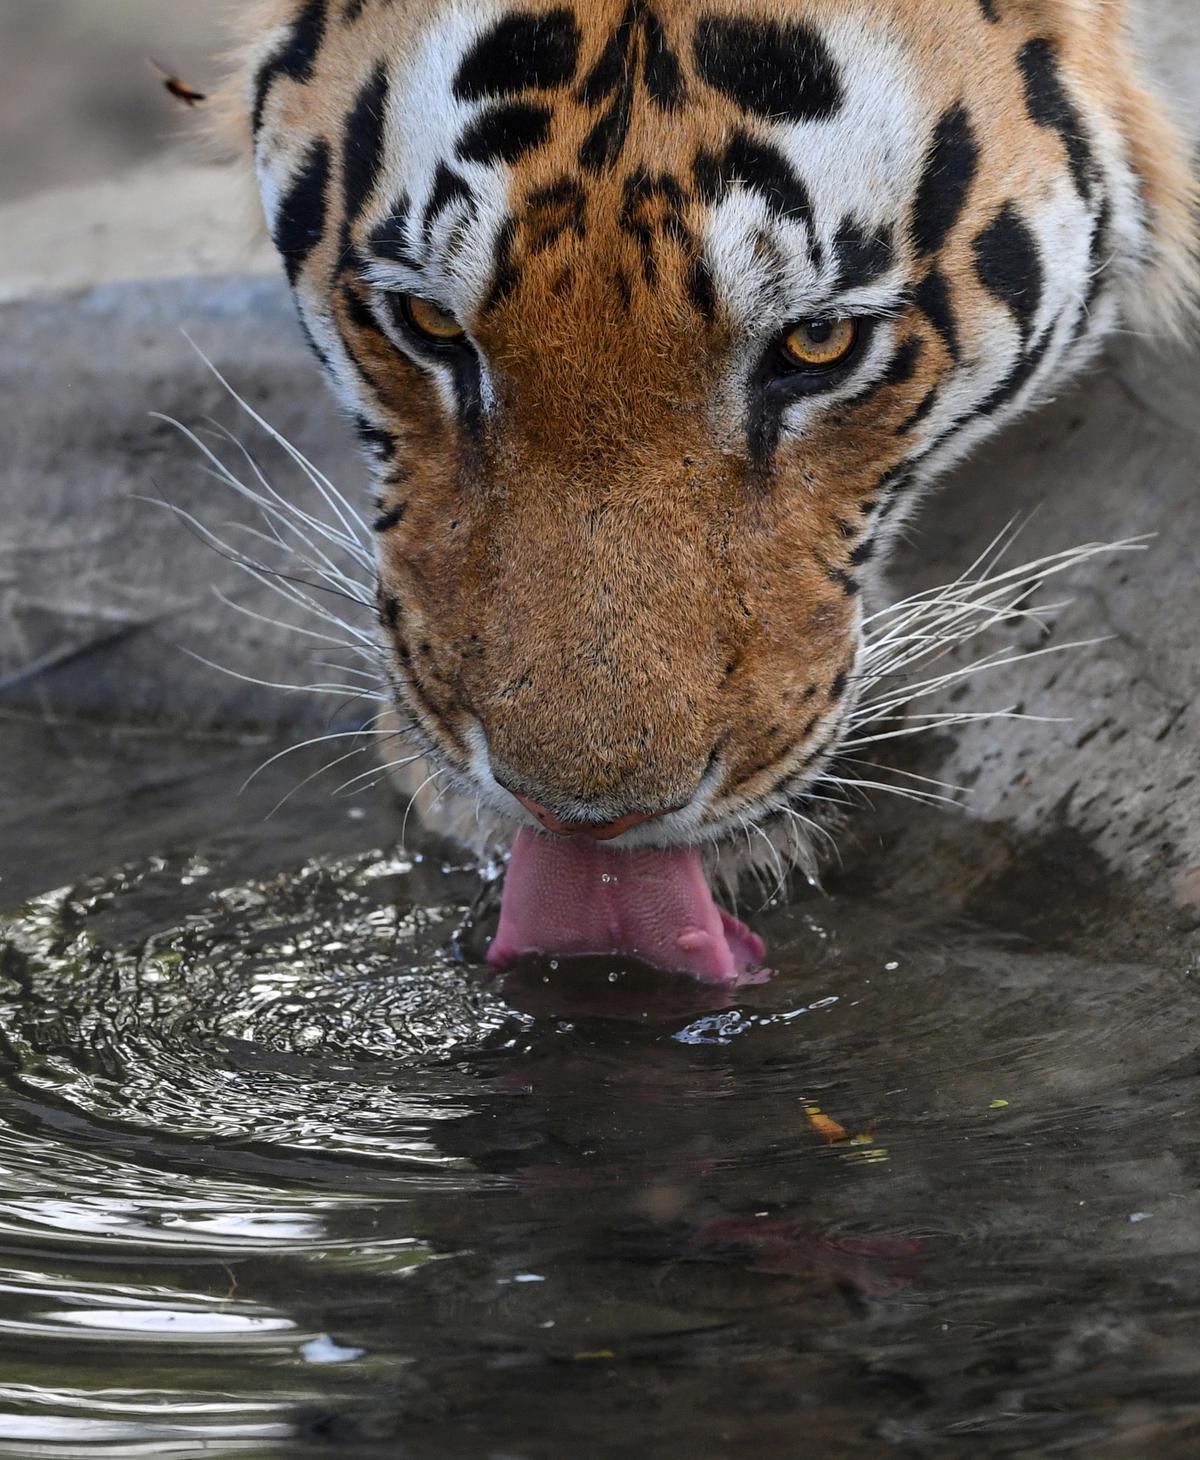 A tiger quenches its thirst on a hot day at an artificial water-hole  in the Kanha National Park, Madhya Pradesh, June 7, 2019.